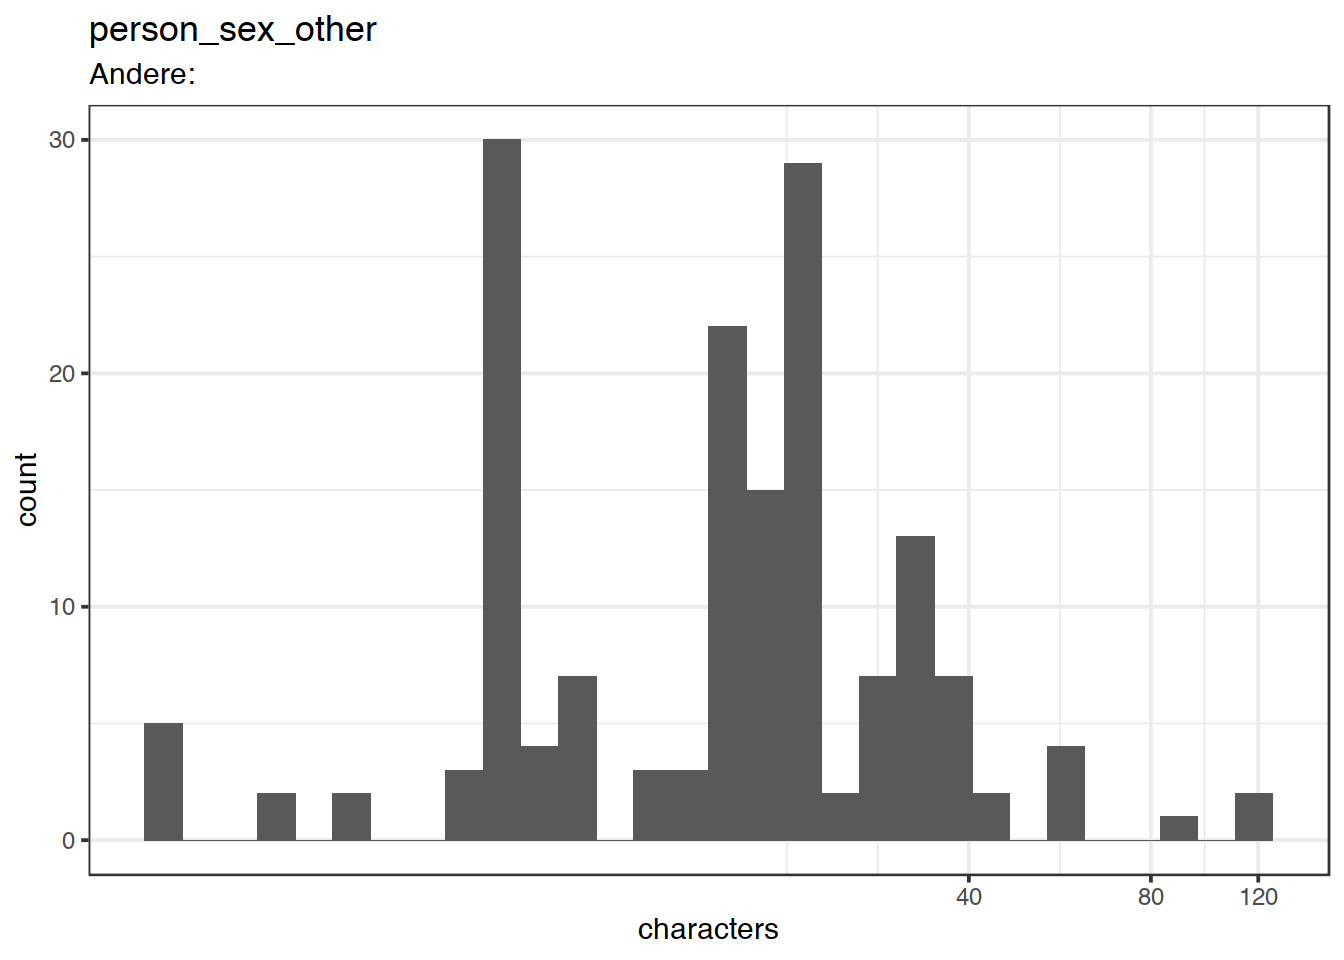 Distribution of values for person_sex_other